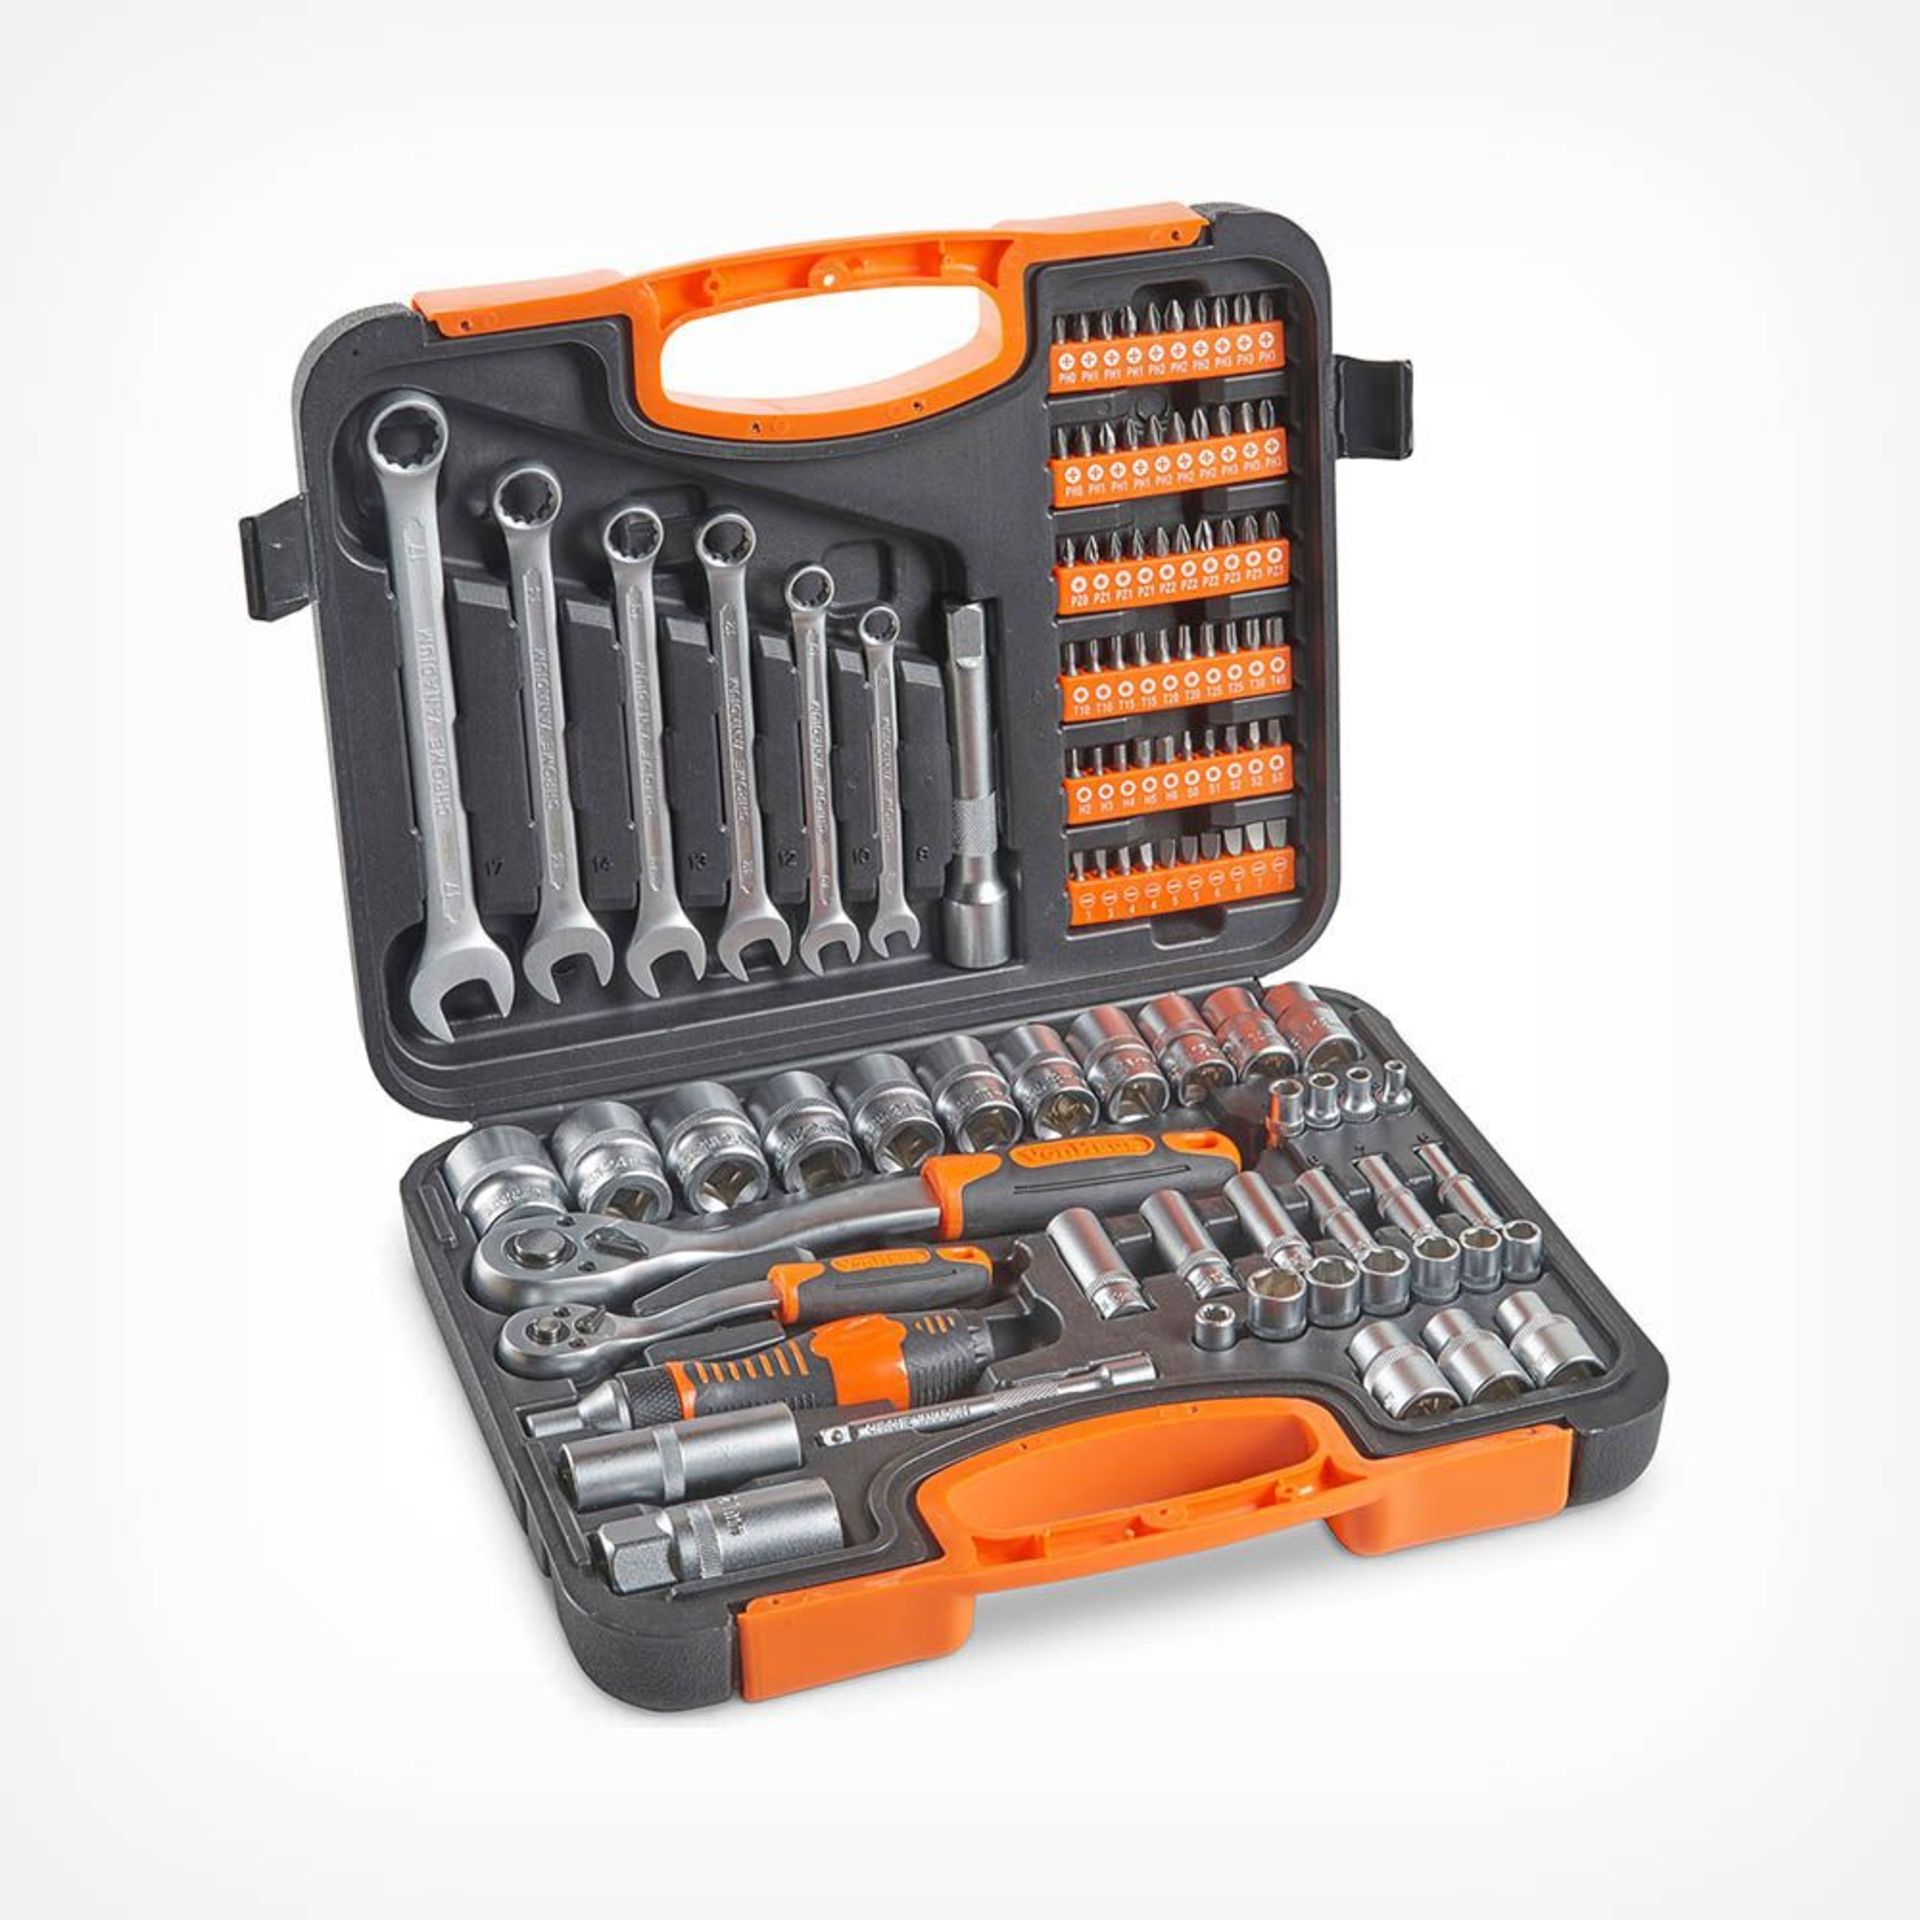 104pc Socket Set. - ER34. If you’ve ever found yourself hunting around for the right spanner or